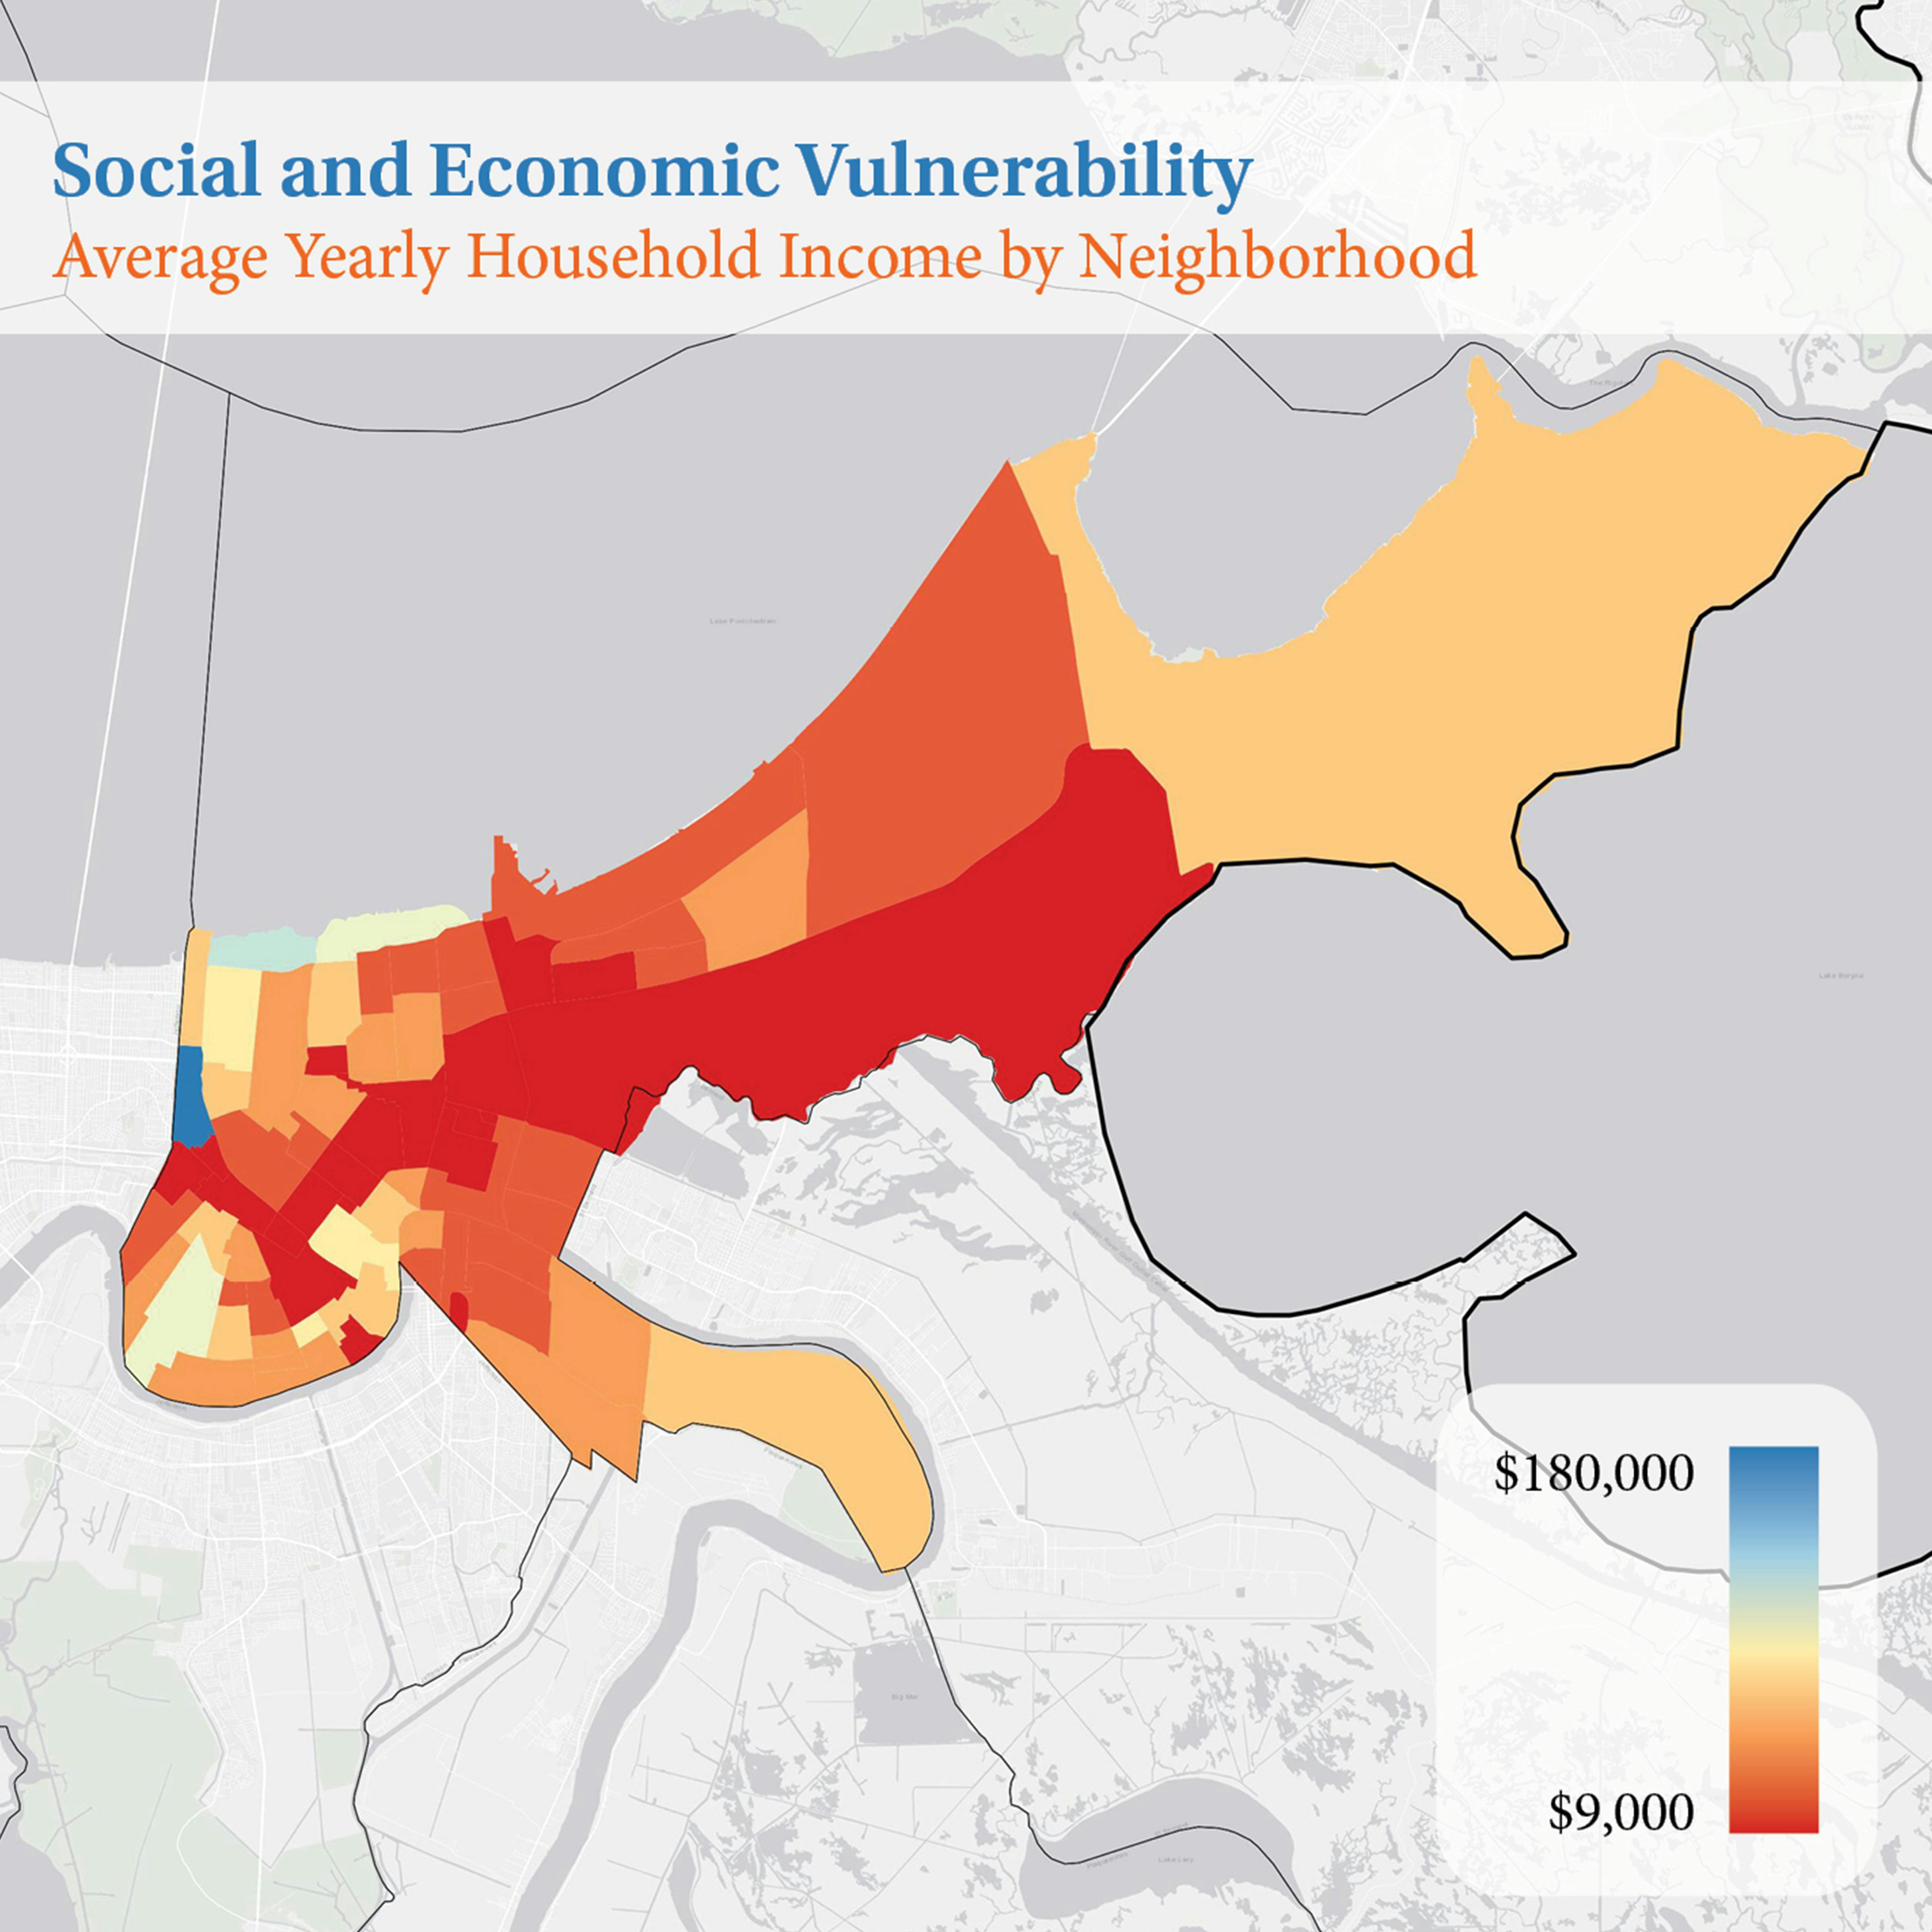 A map illustrating social and economic vulnerability within the city of New Orleans is significantly high with exceptions to the following areas: Lake Shore, Lake Terrace Oaks, Lakeview, Audubon, Lakewood, Warehouse District, and the Garden District.